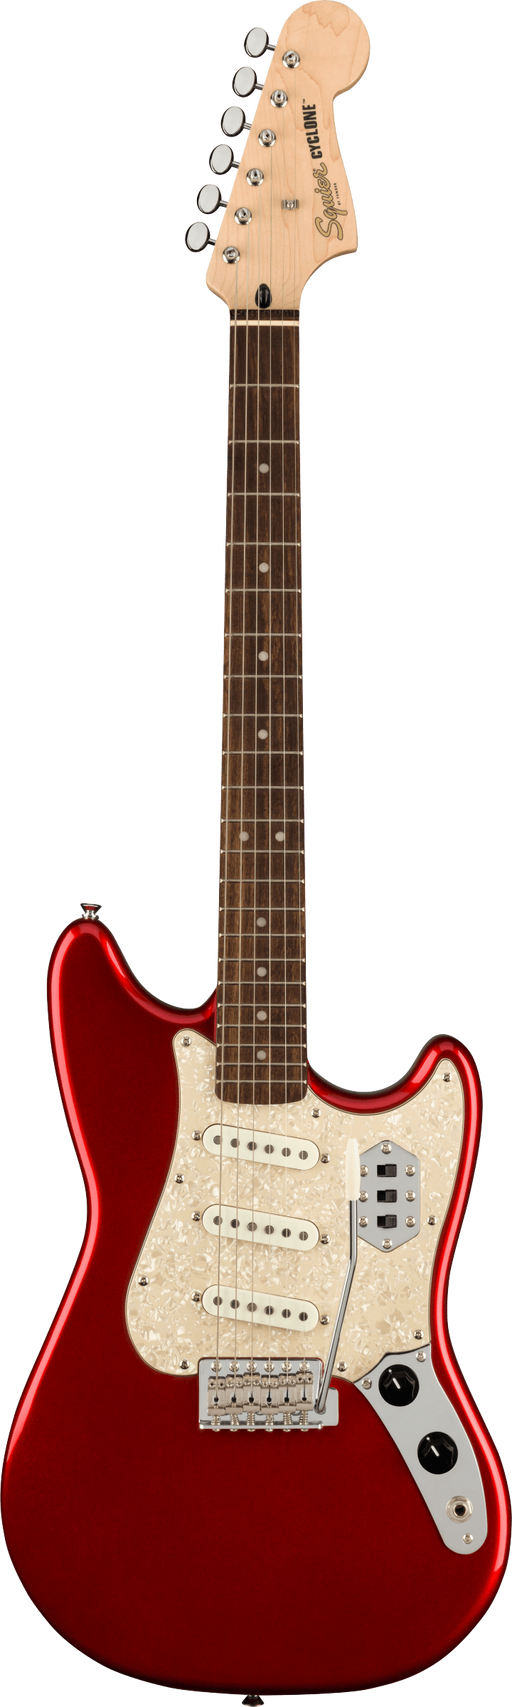 Squier Paranormal Cyclone Laurel Fingerboard Pearloid Pickguard Candy Apple Red